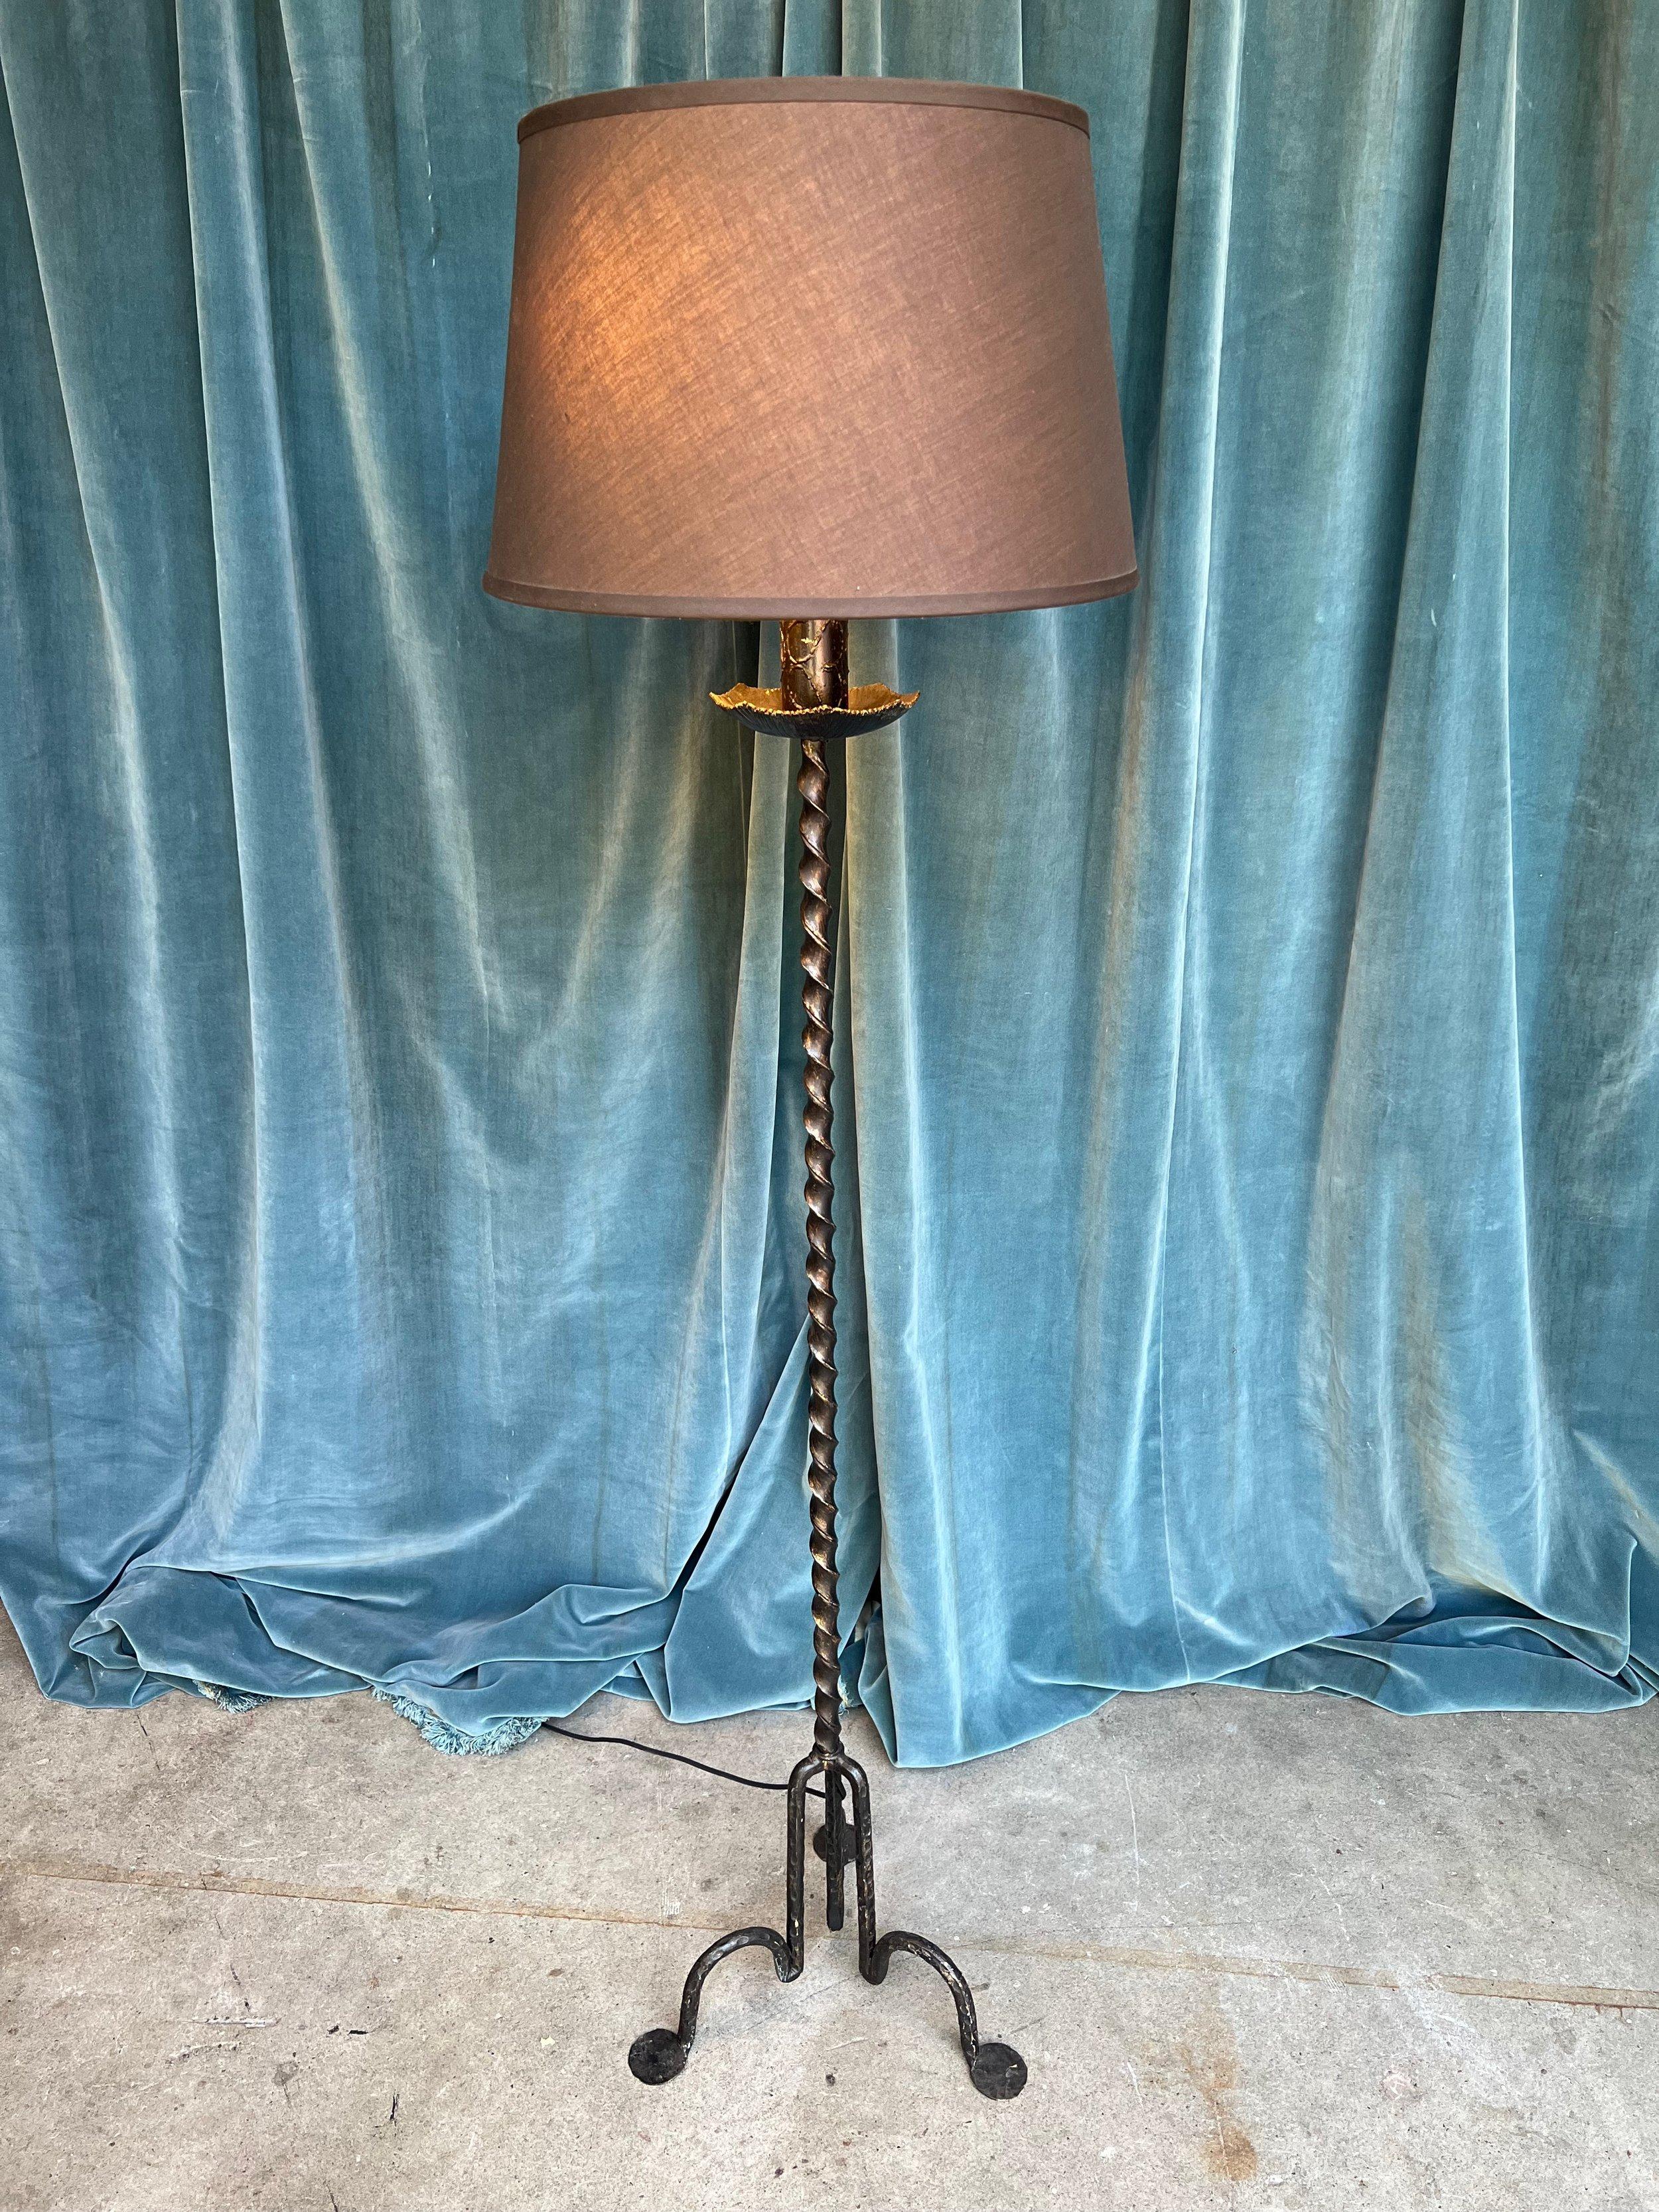 An unusual 1950s Spanish black painted wrought iron floor lamp in a captivating modernist style. The twisted central stem is mounted on a geometric tripod base with solid, pronounced feet, reflecting the exquisite craftsmanship and artistry of the